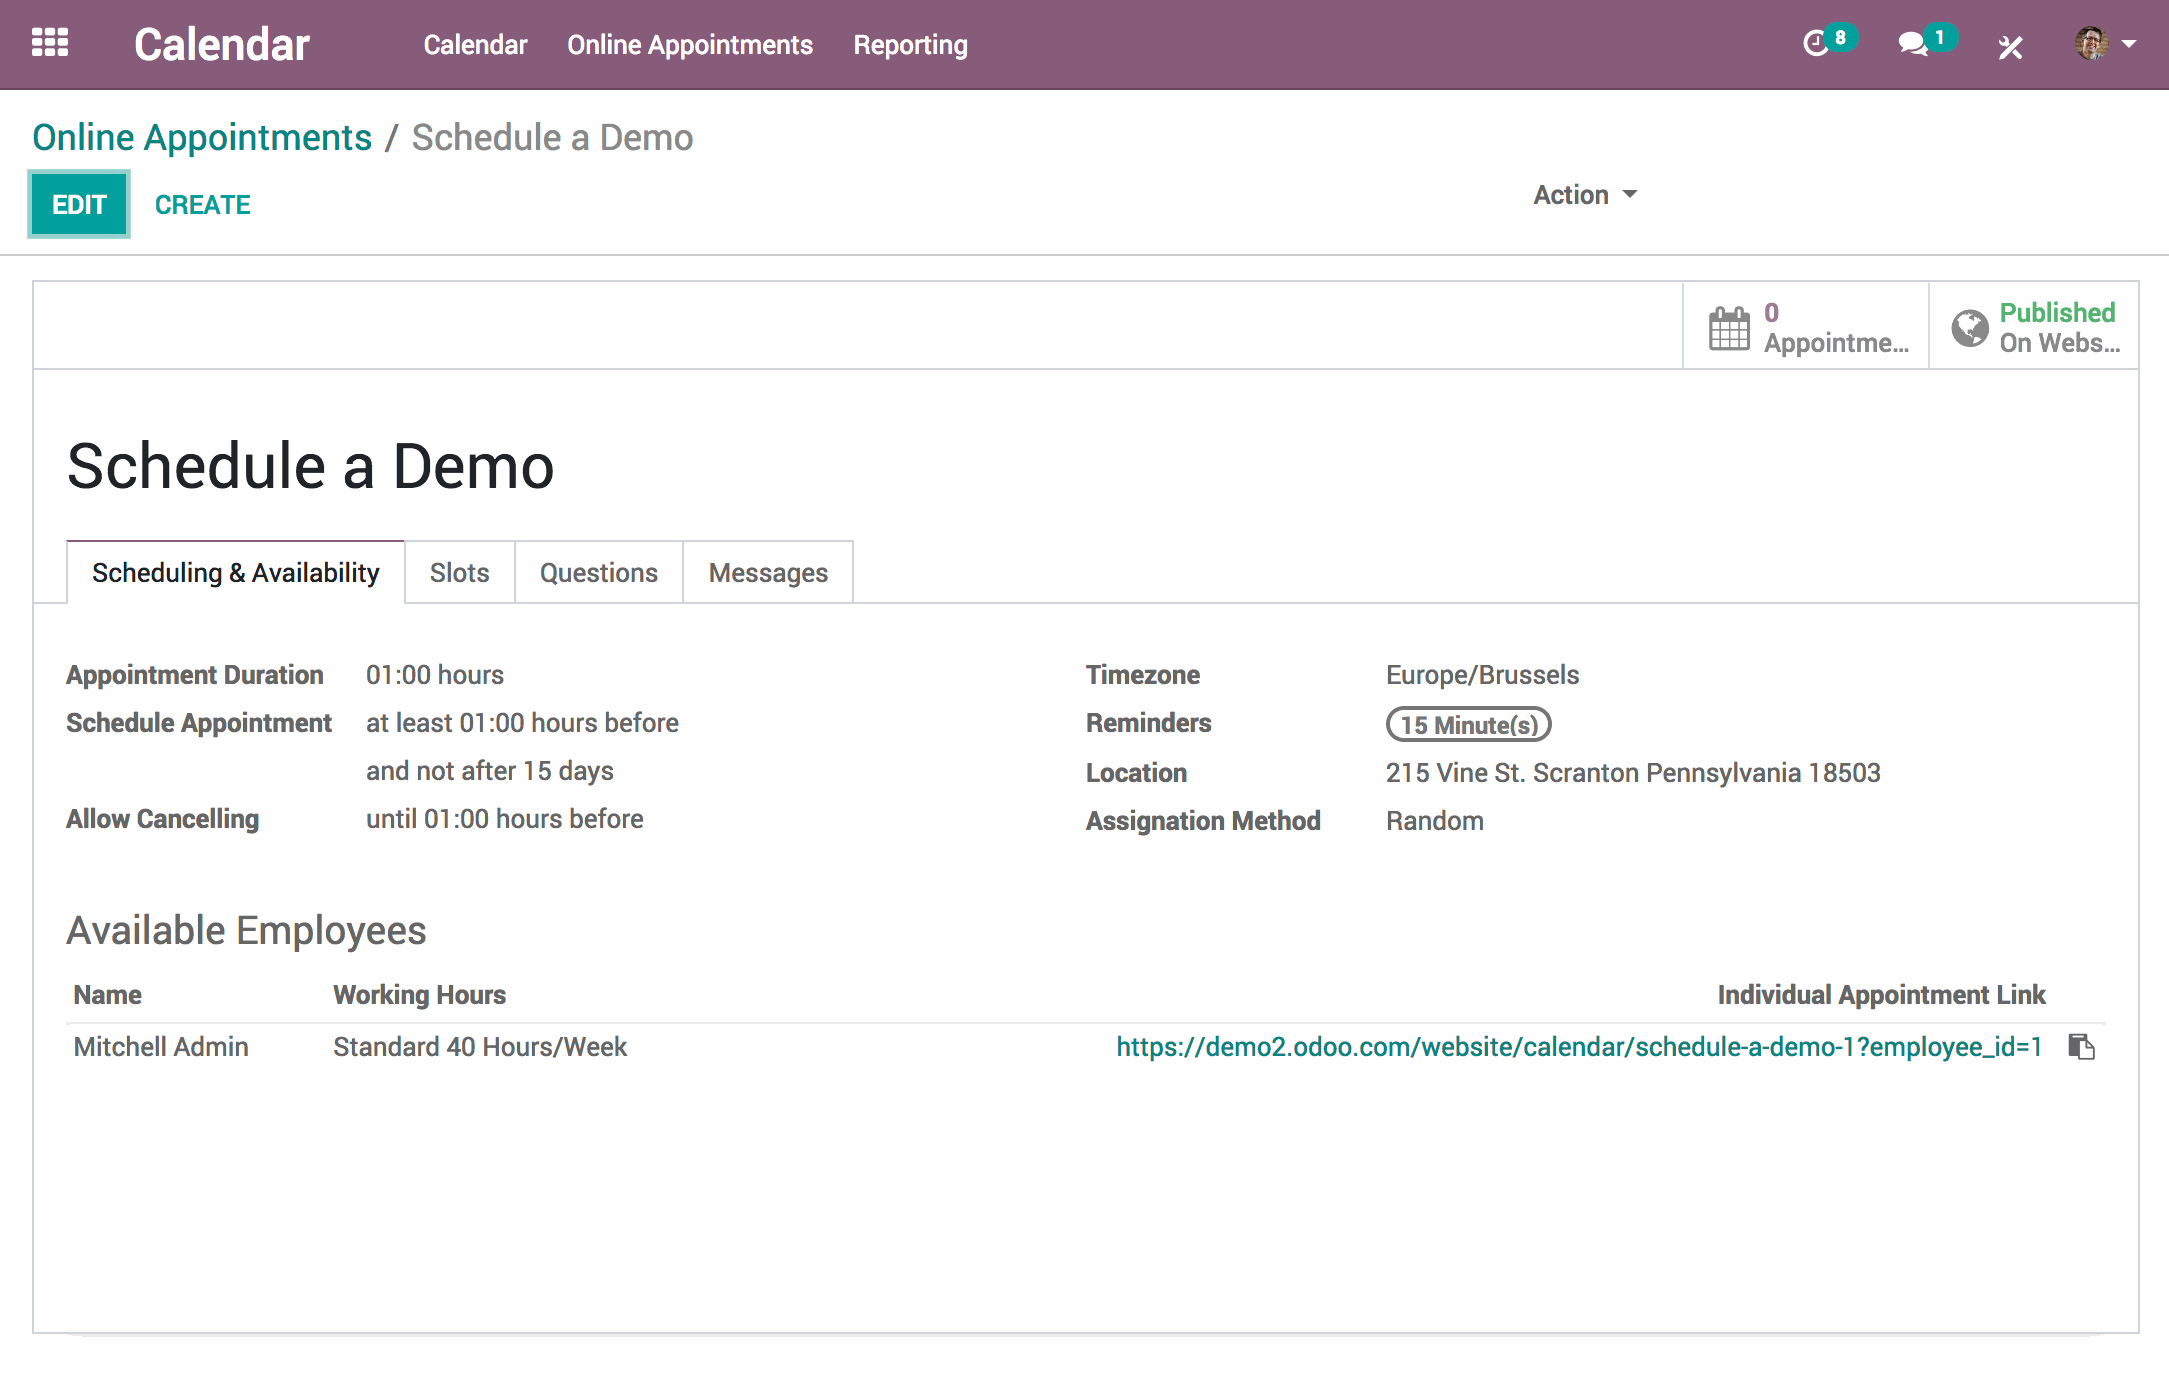 Odoo Appointments' interface - Scheduling and availability